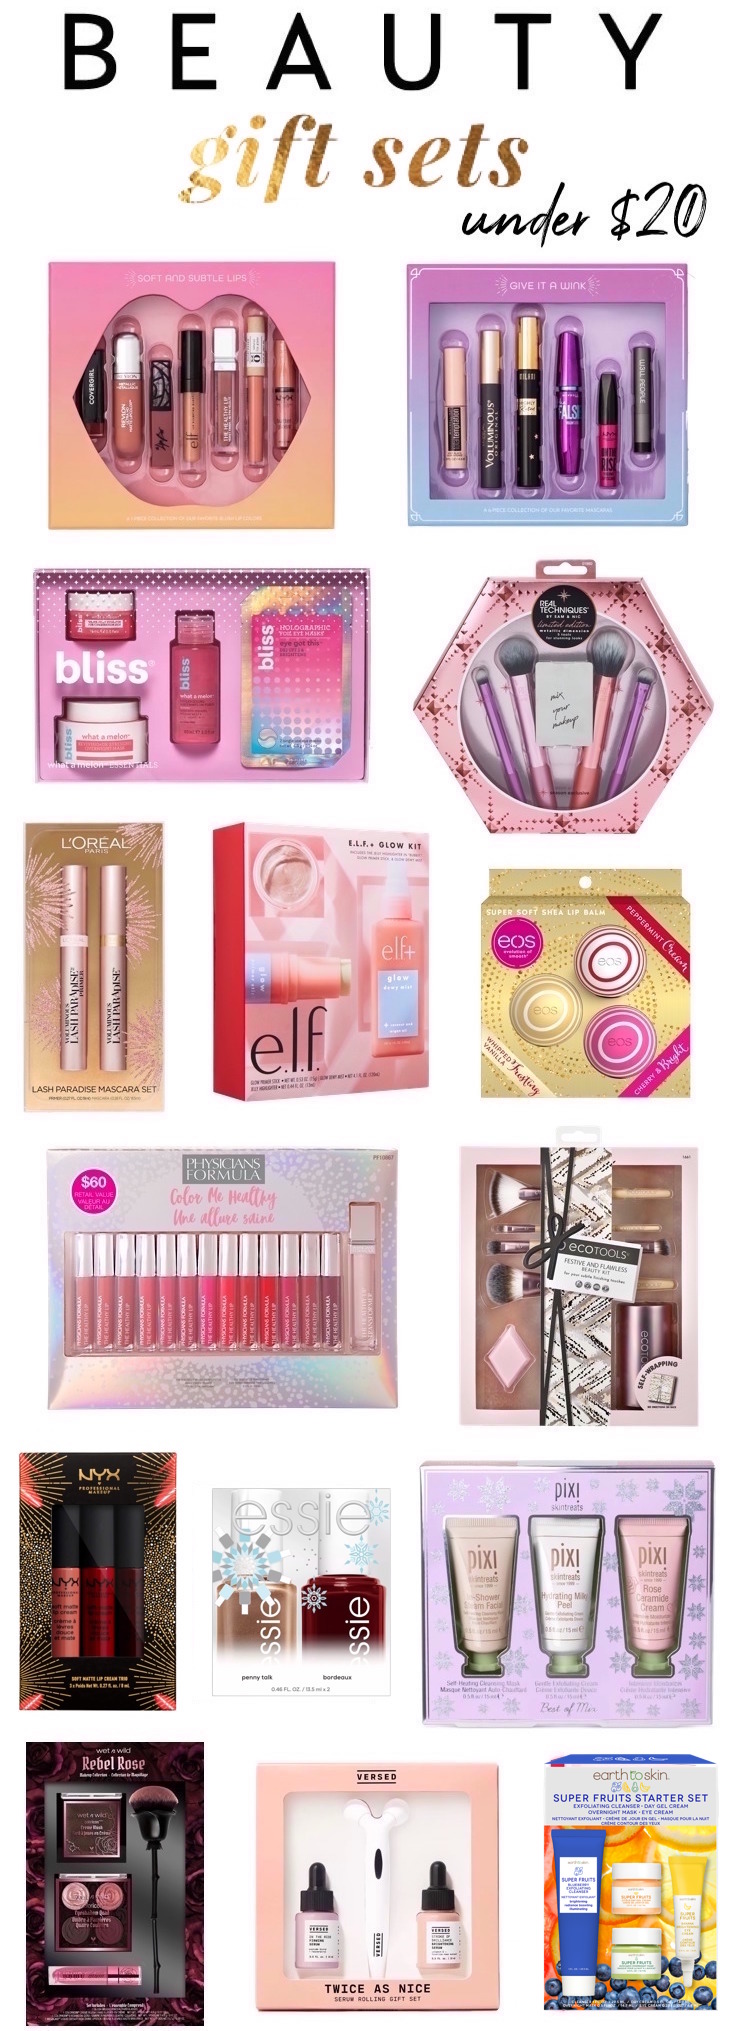 Best Drugstore Beauty Gift Sets (Under $20) Holiday 2019 #holidaygiftideas #beautygifts #makeupgifts #giftsforher #holidaygifts #beautygiftsets #holiday2019 #holidaygift 